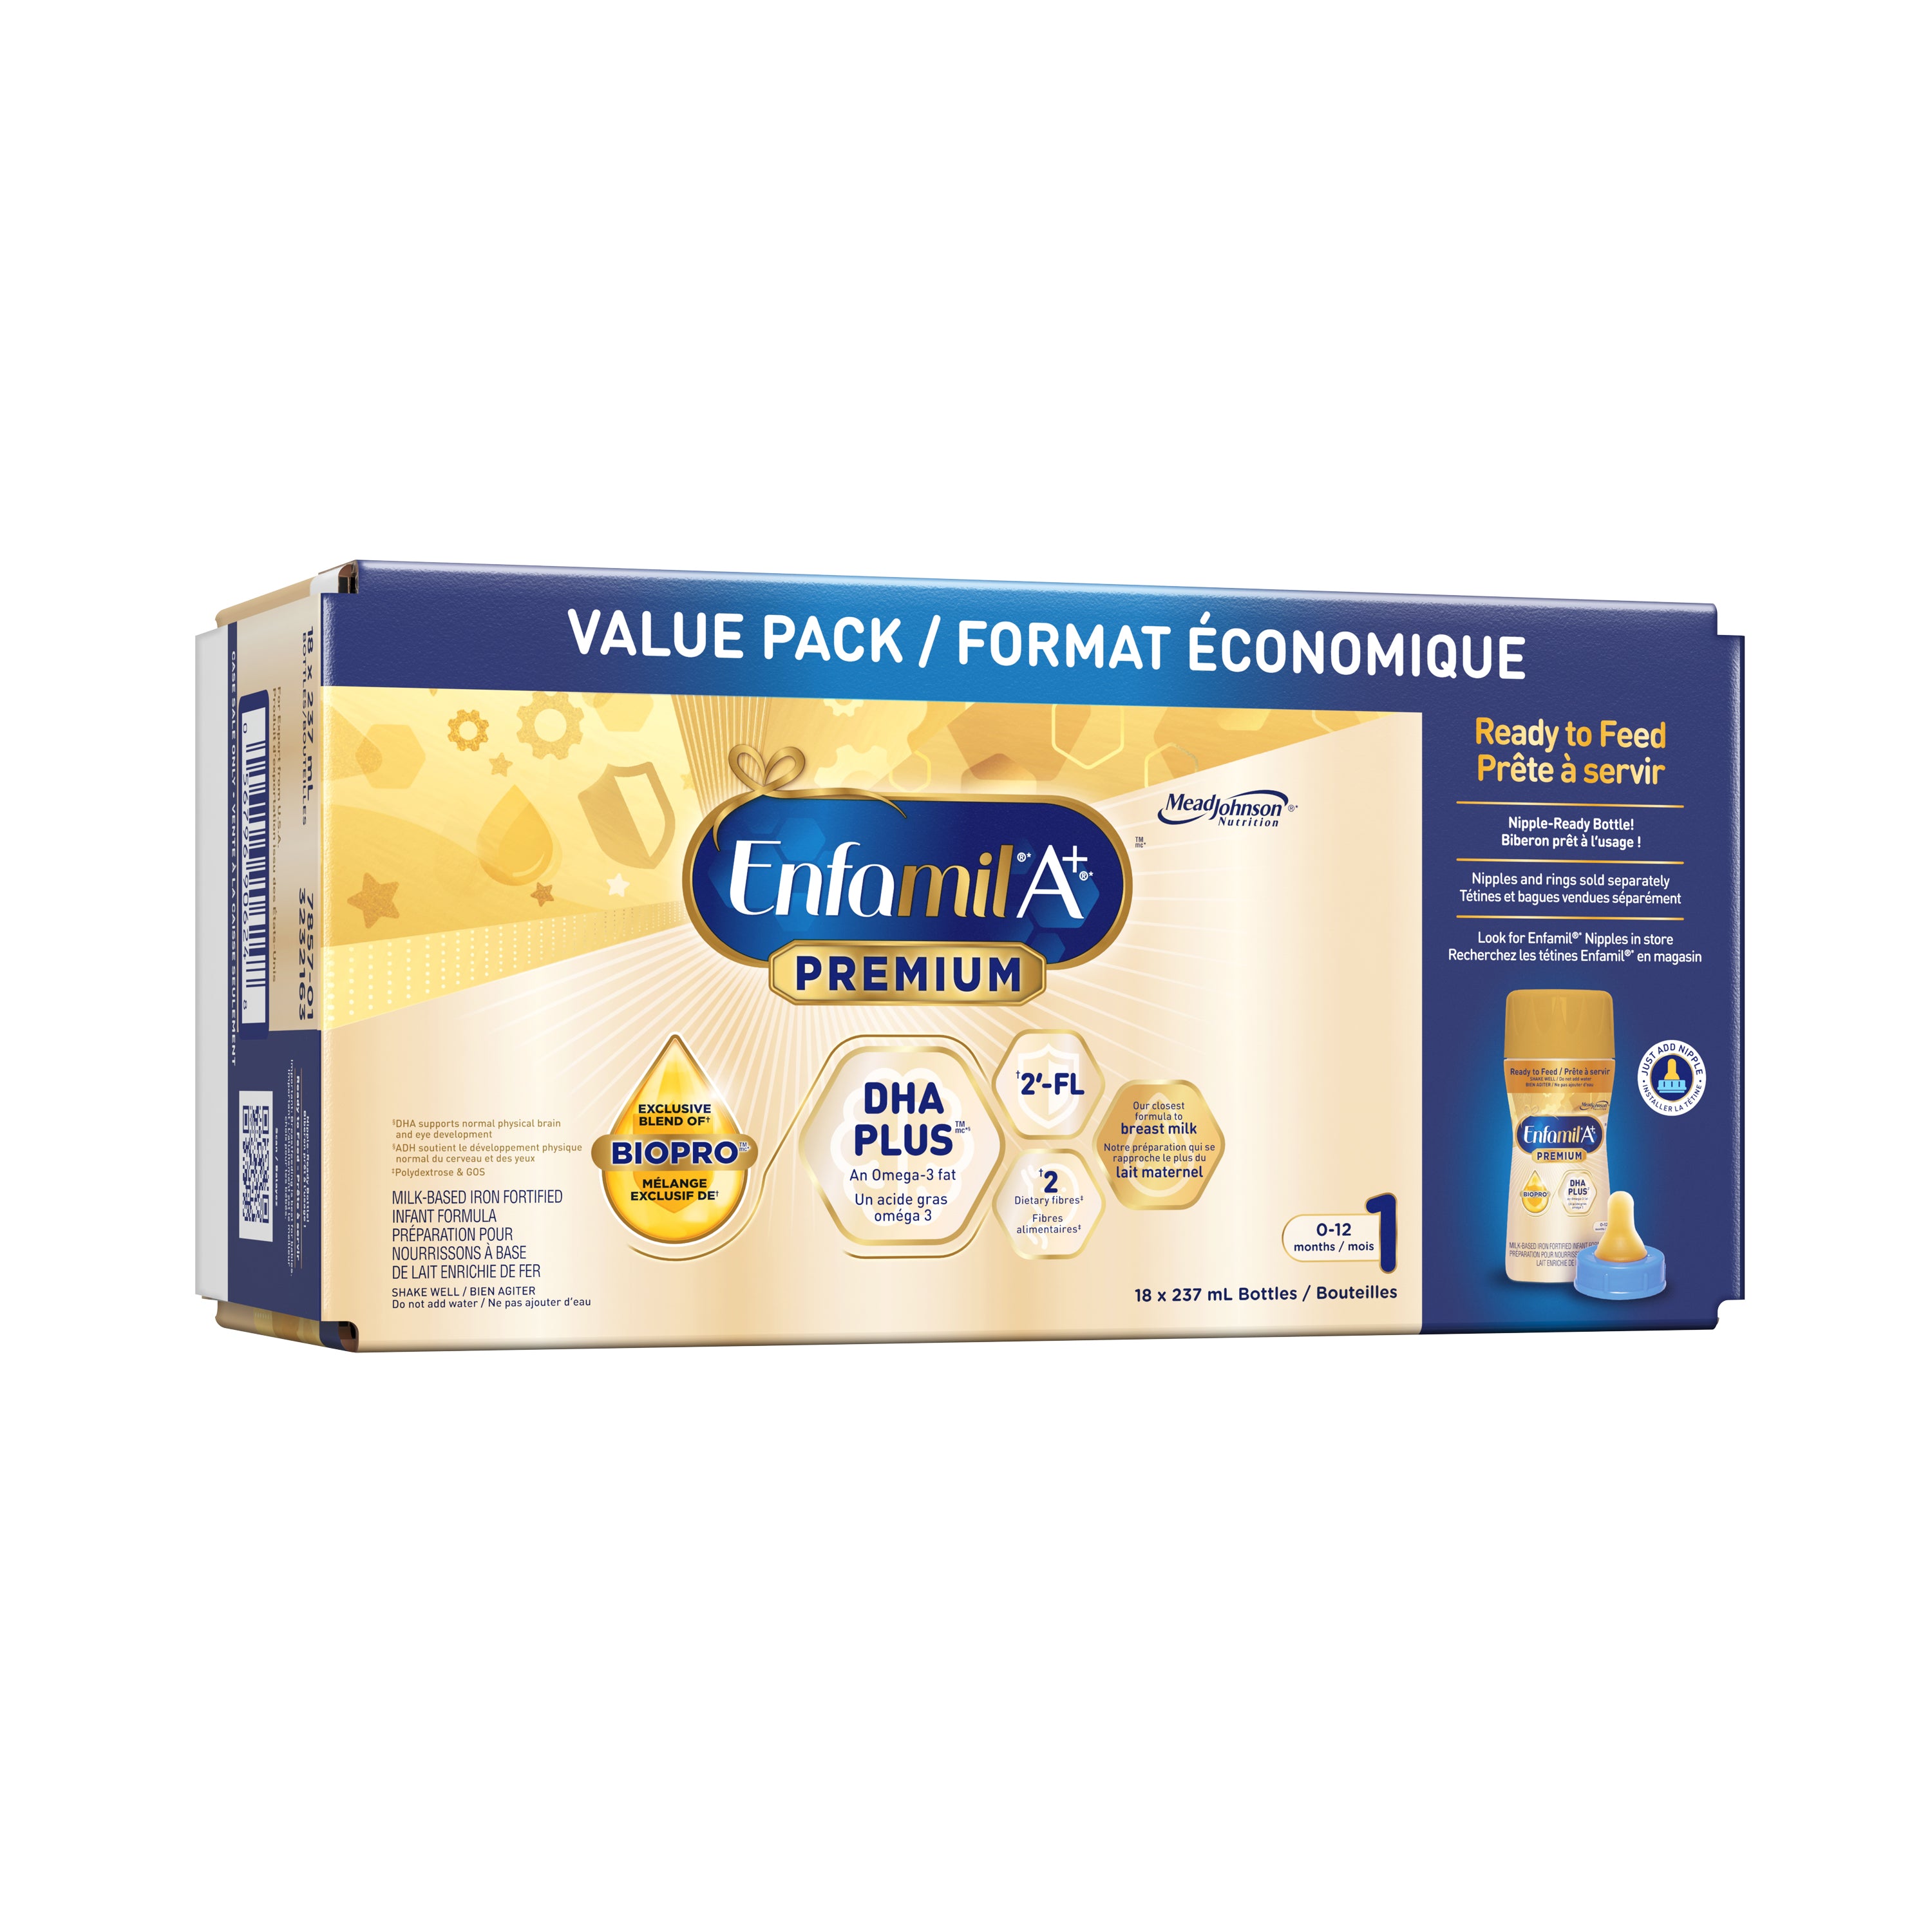 Enfamil A+ Premium ready to feed, yellow and gold packaging, 18 units per box, 257 mL bottles.